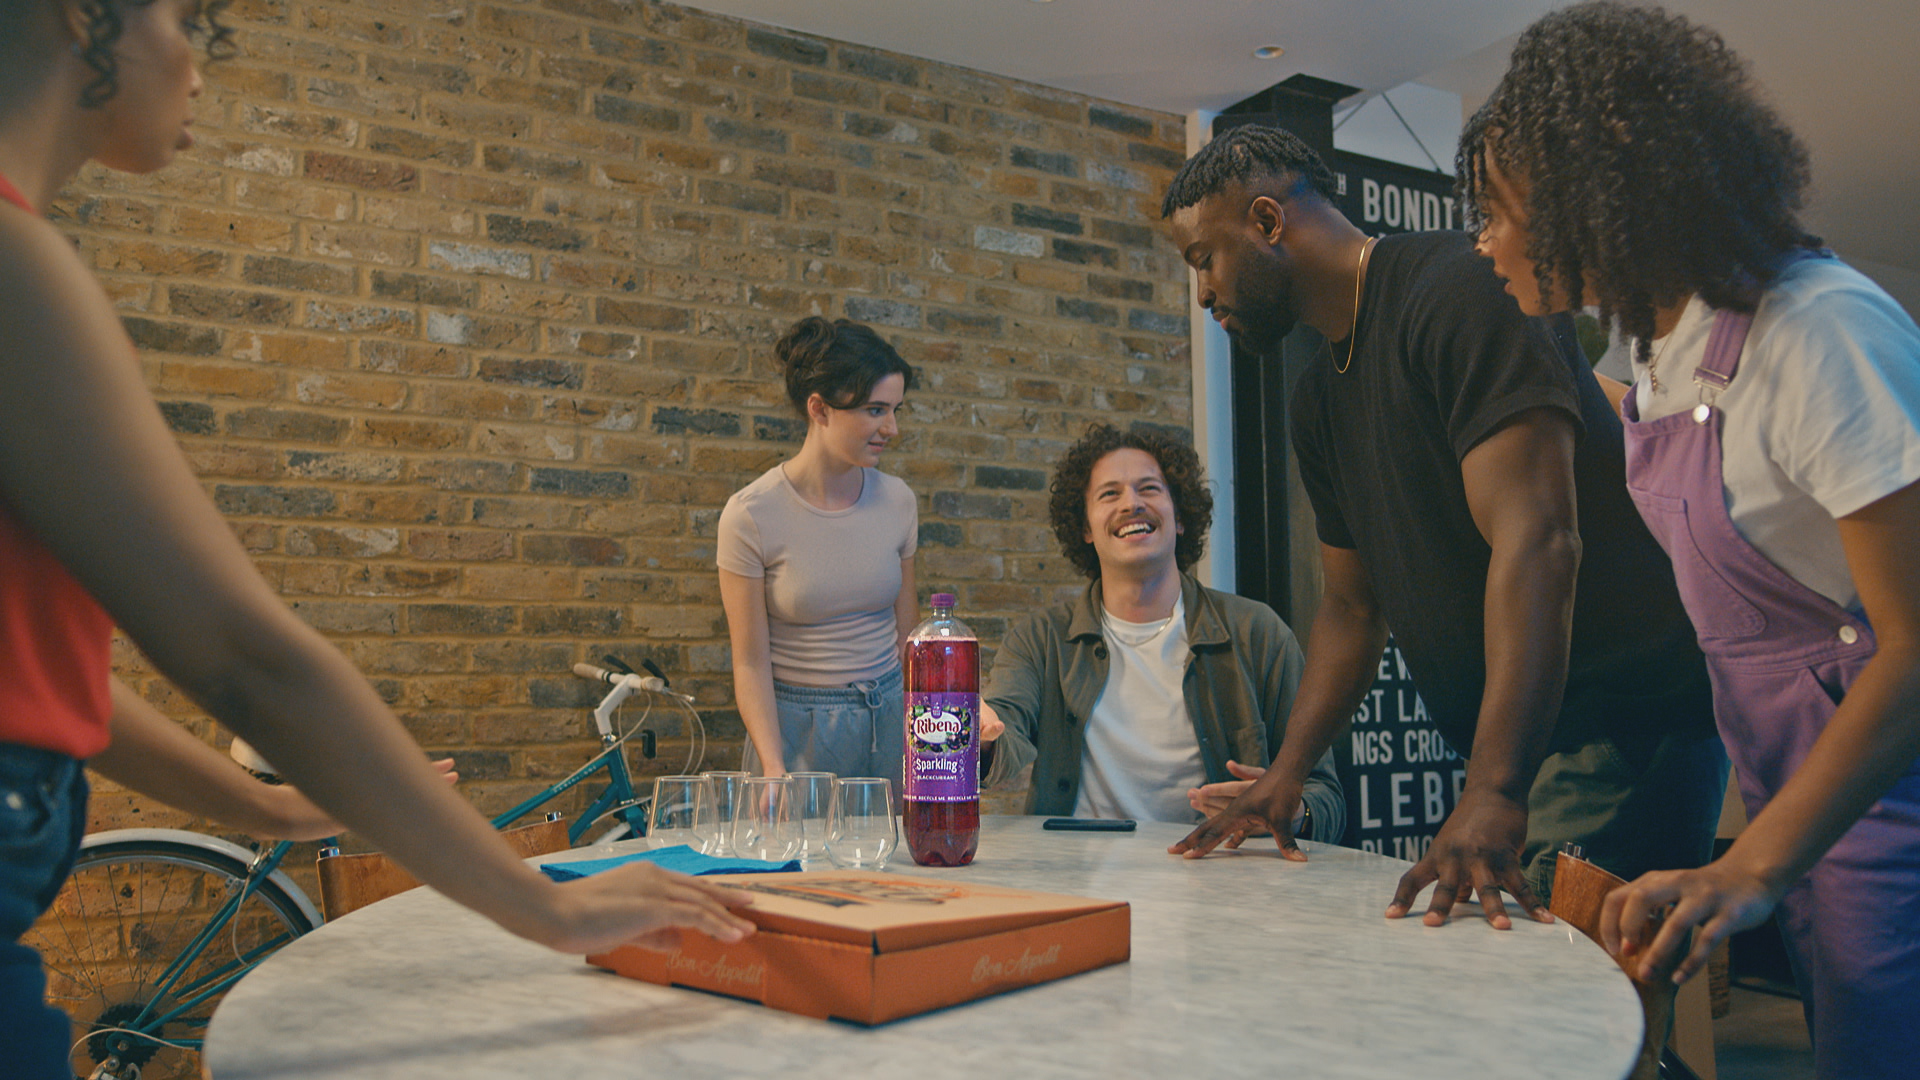 Ribena Sparkling ads and sponsorship with Friday Night In on 4 starts today